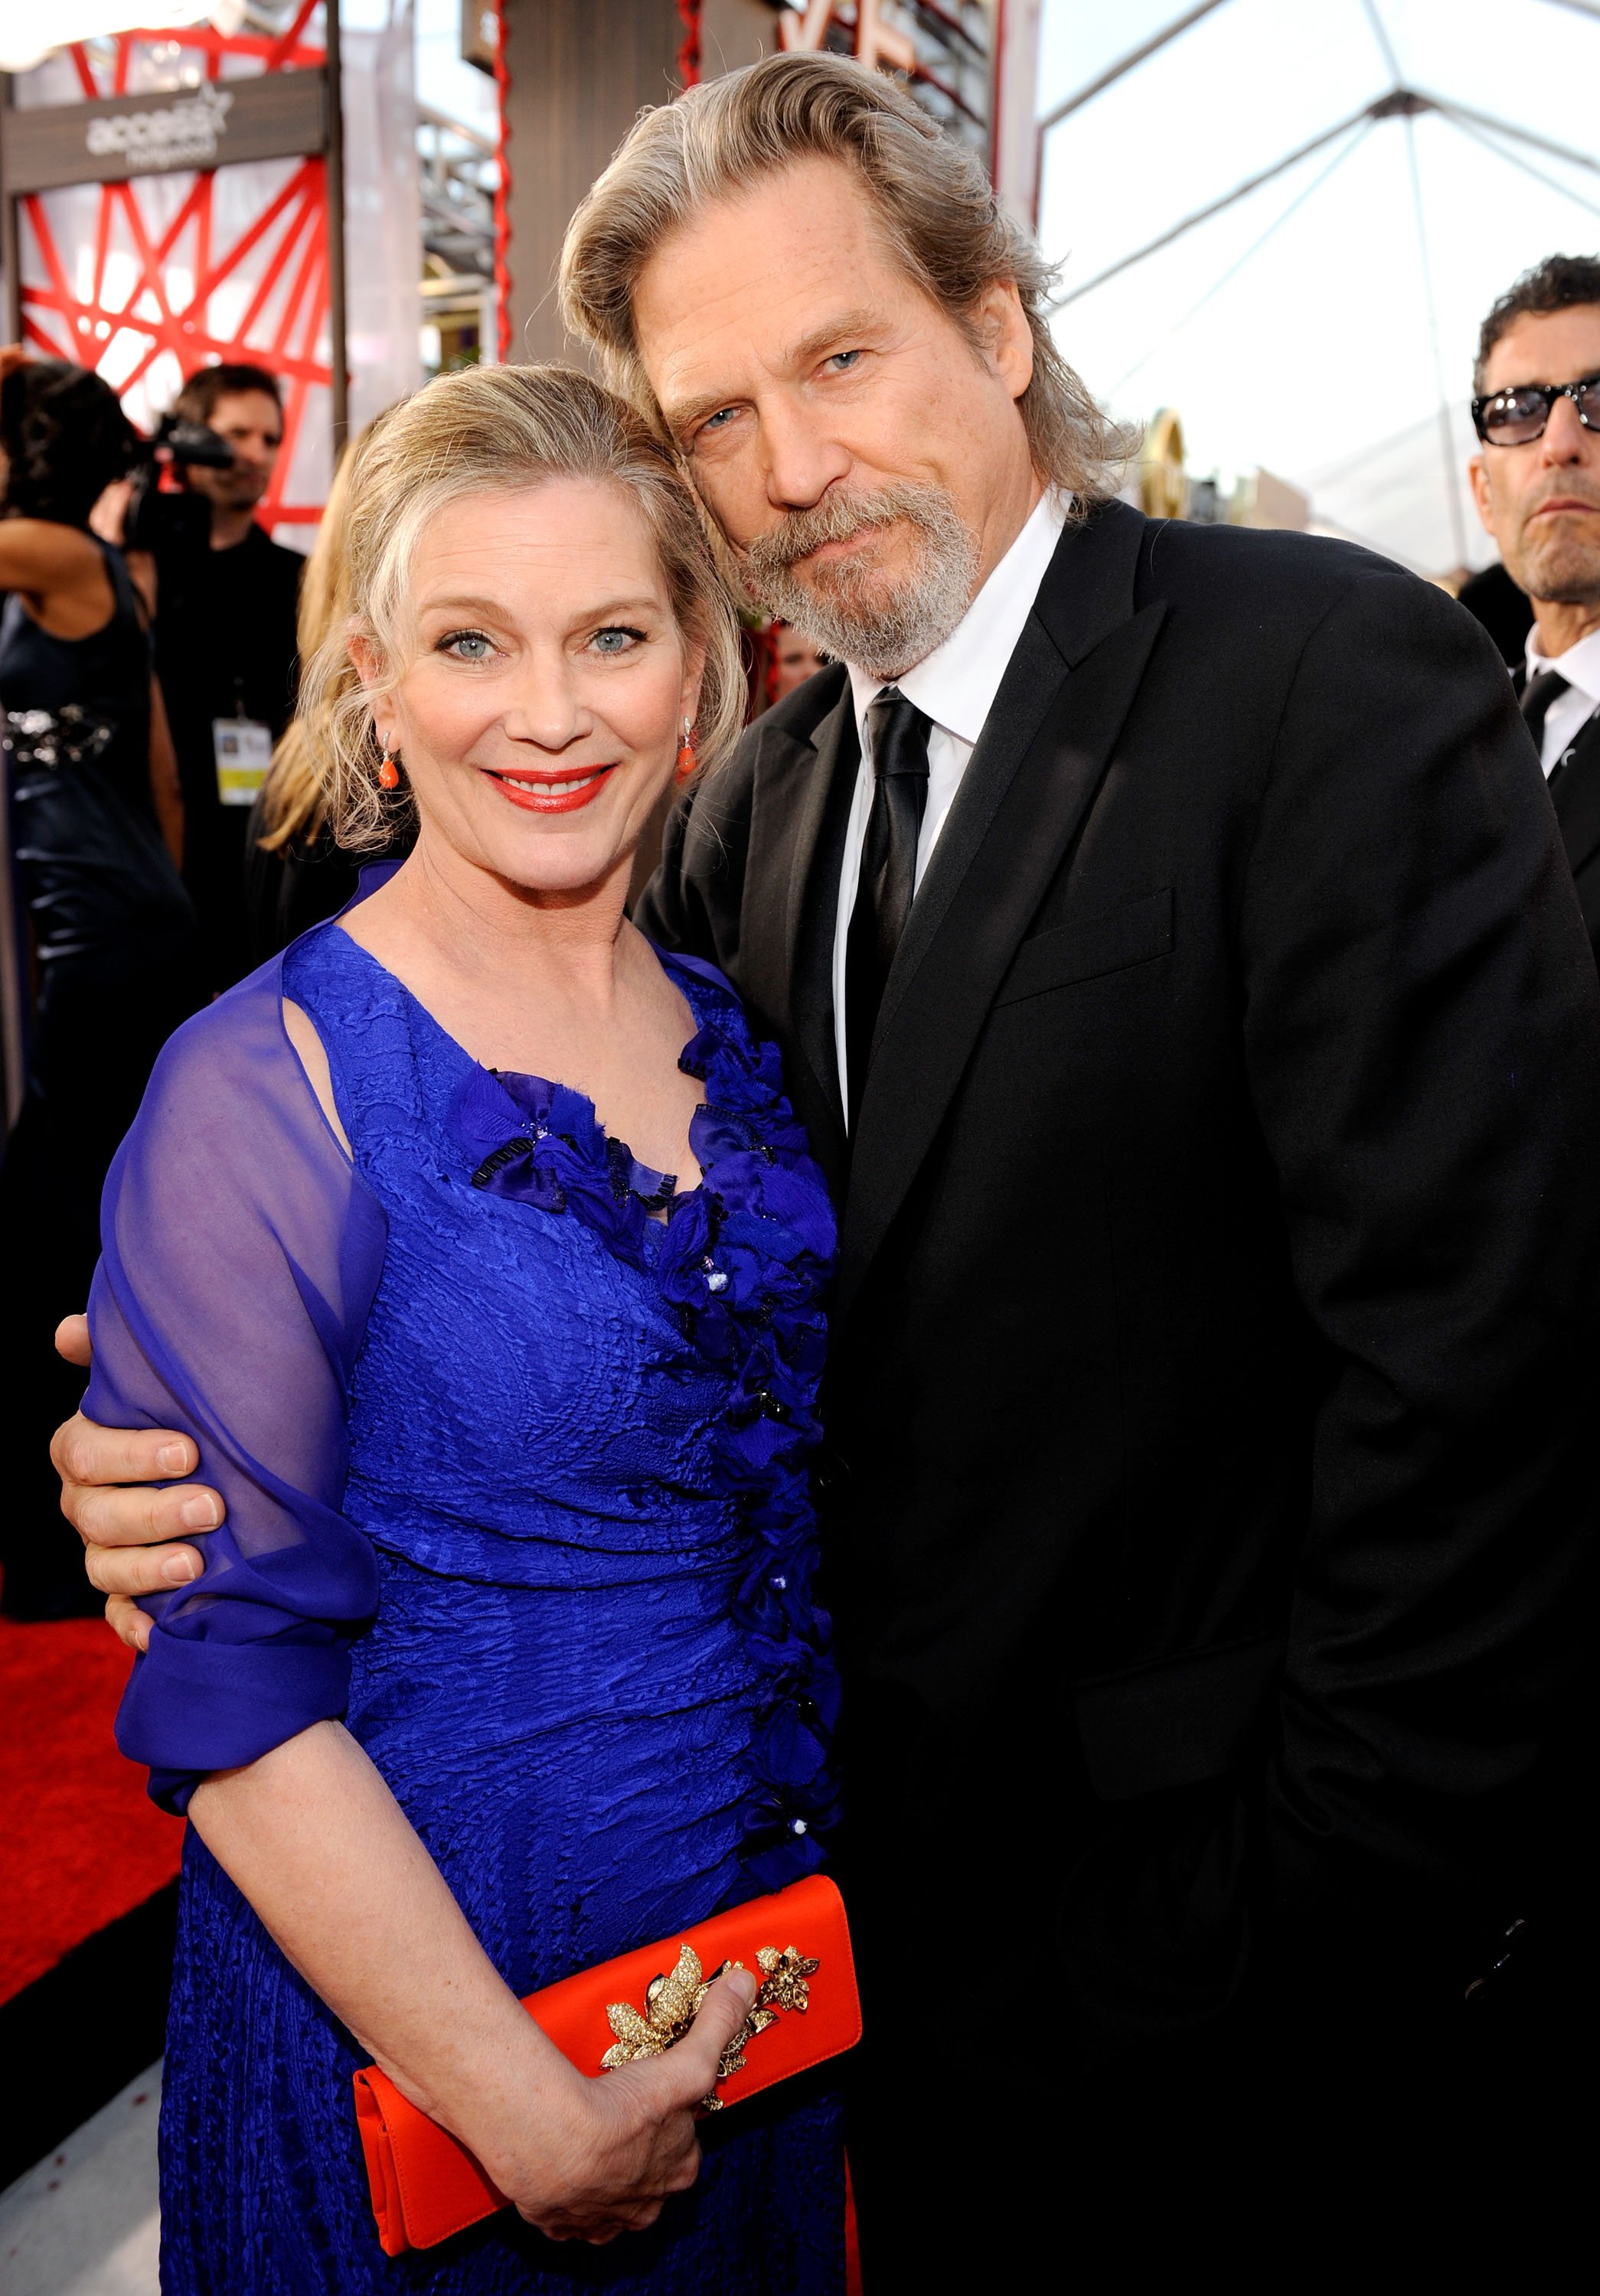 Meet Jeff Bridges Beautiful Wife Susan Geston Whom He Fell In Love With Over Four Decades Ago